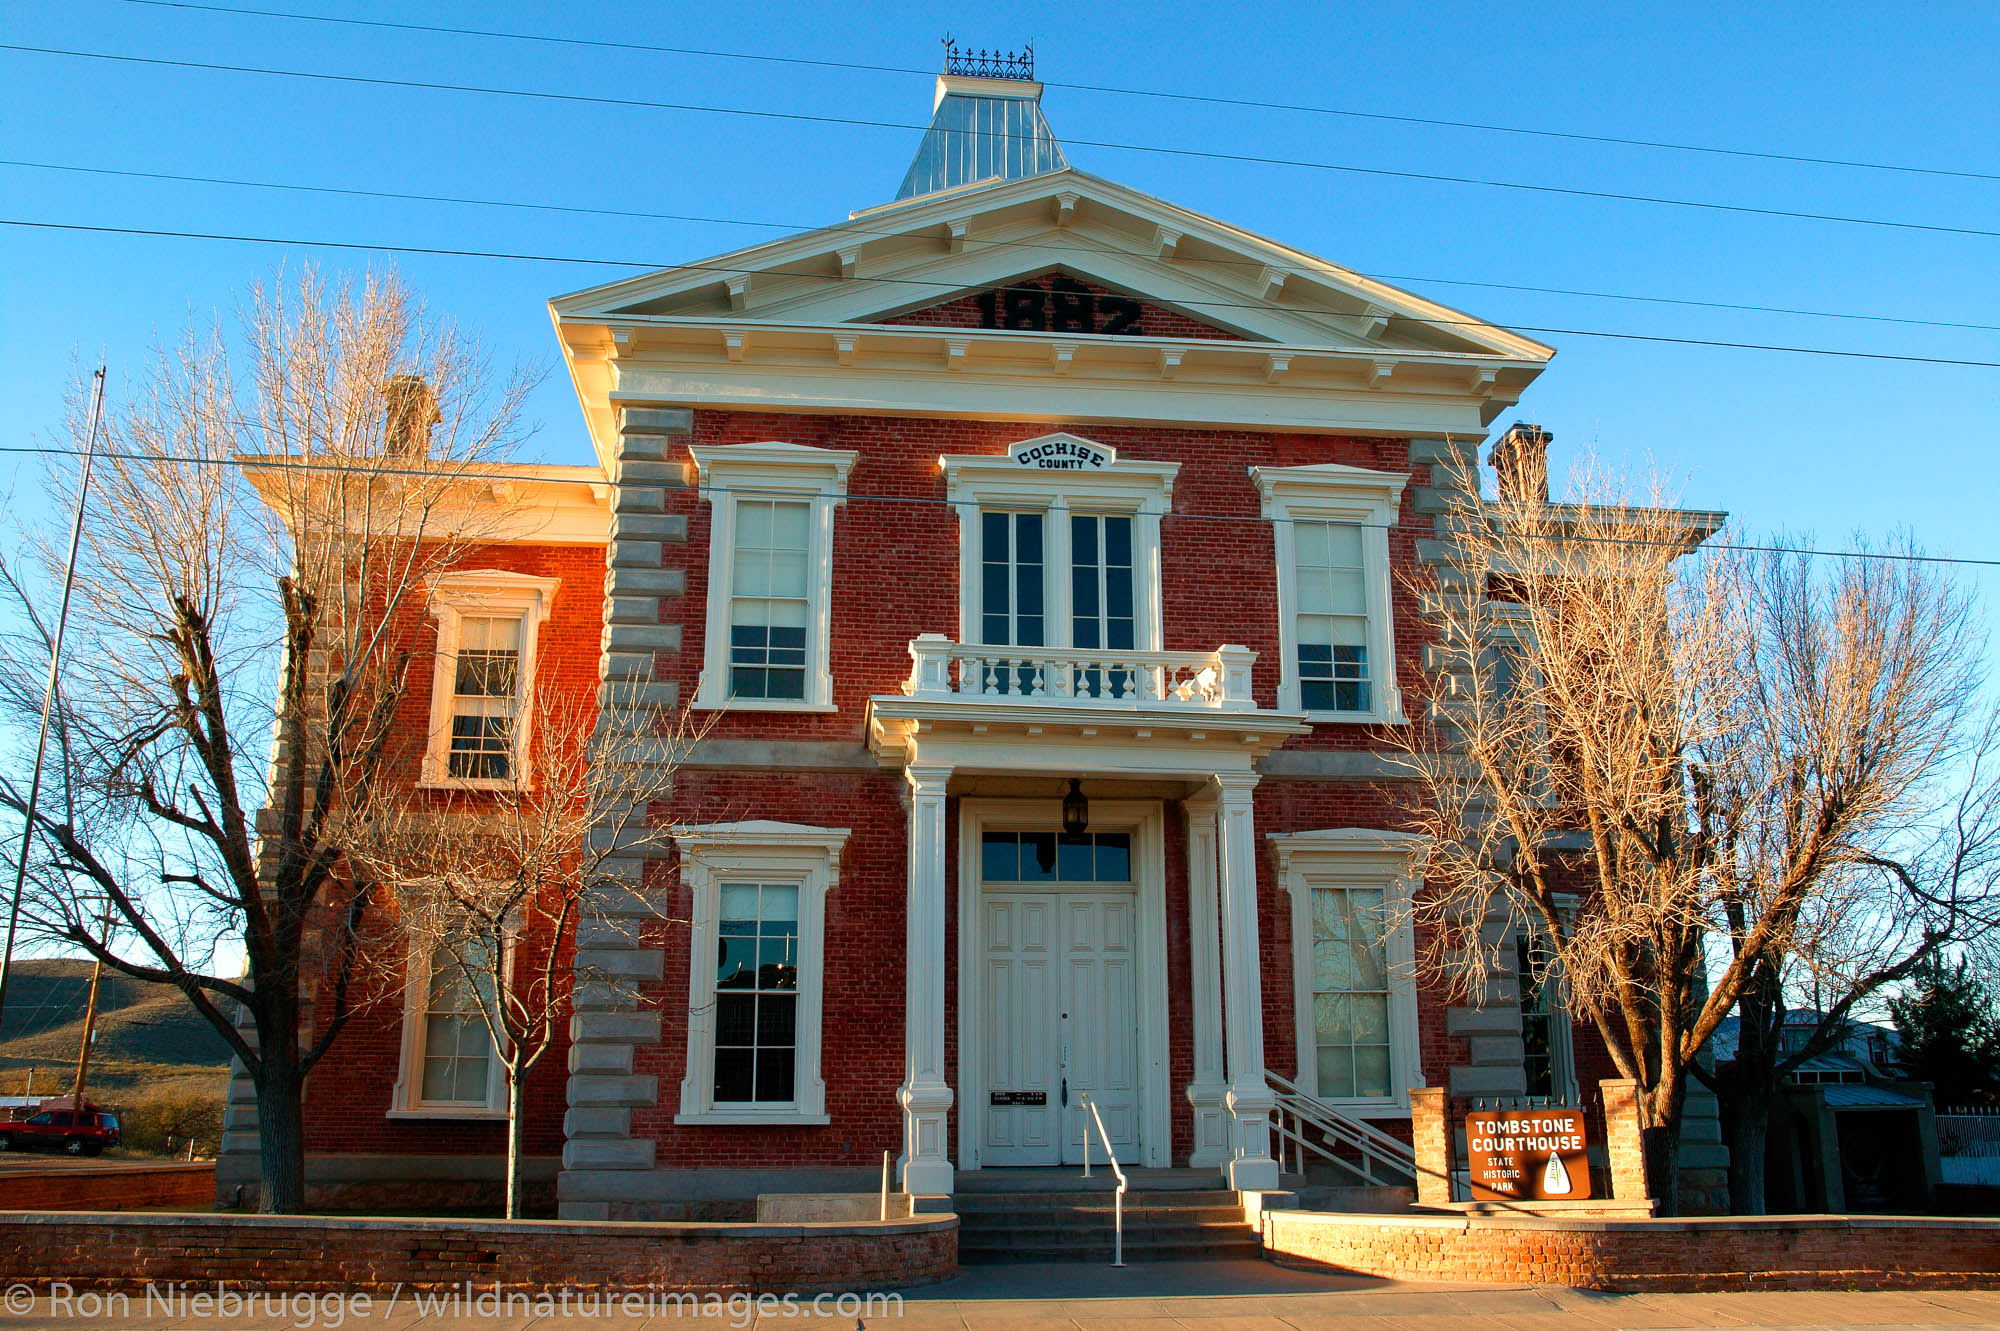 The Tombstone Courthouse State Park in Historic Tombstone Arizona, site of the OK Coral gunfight.